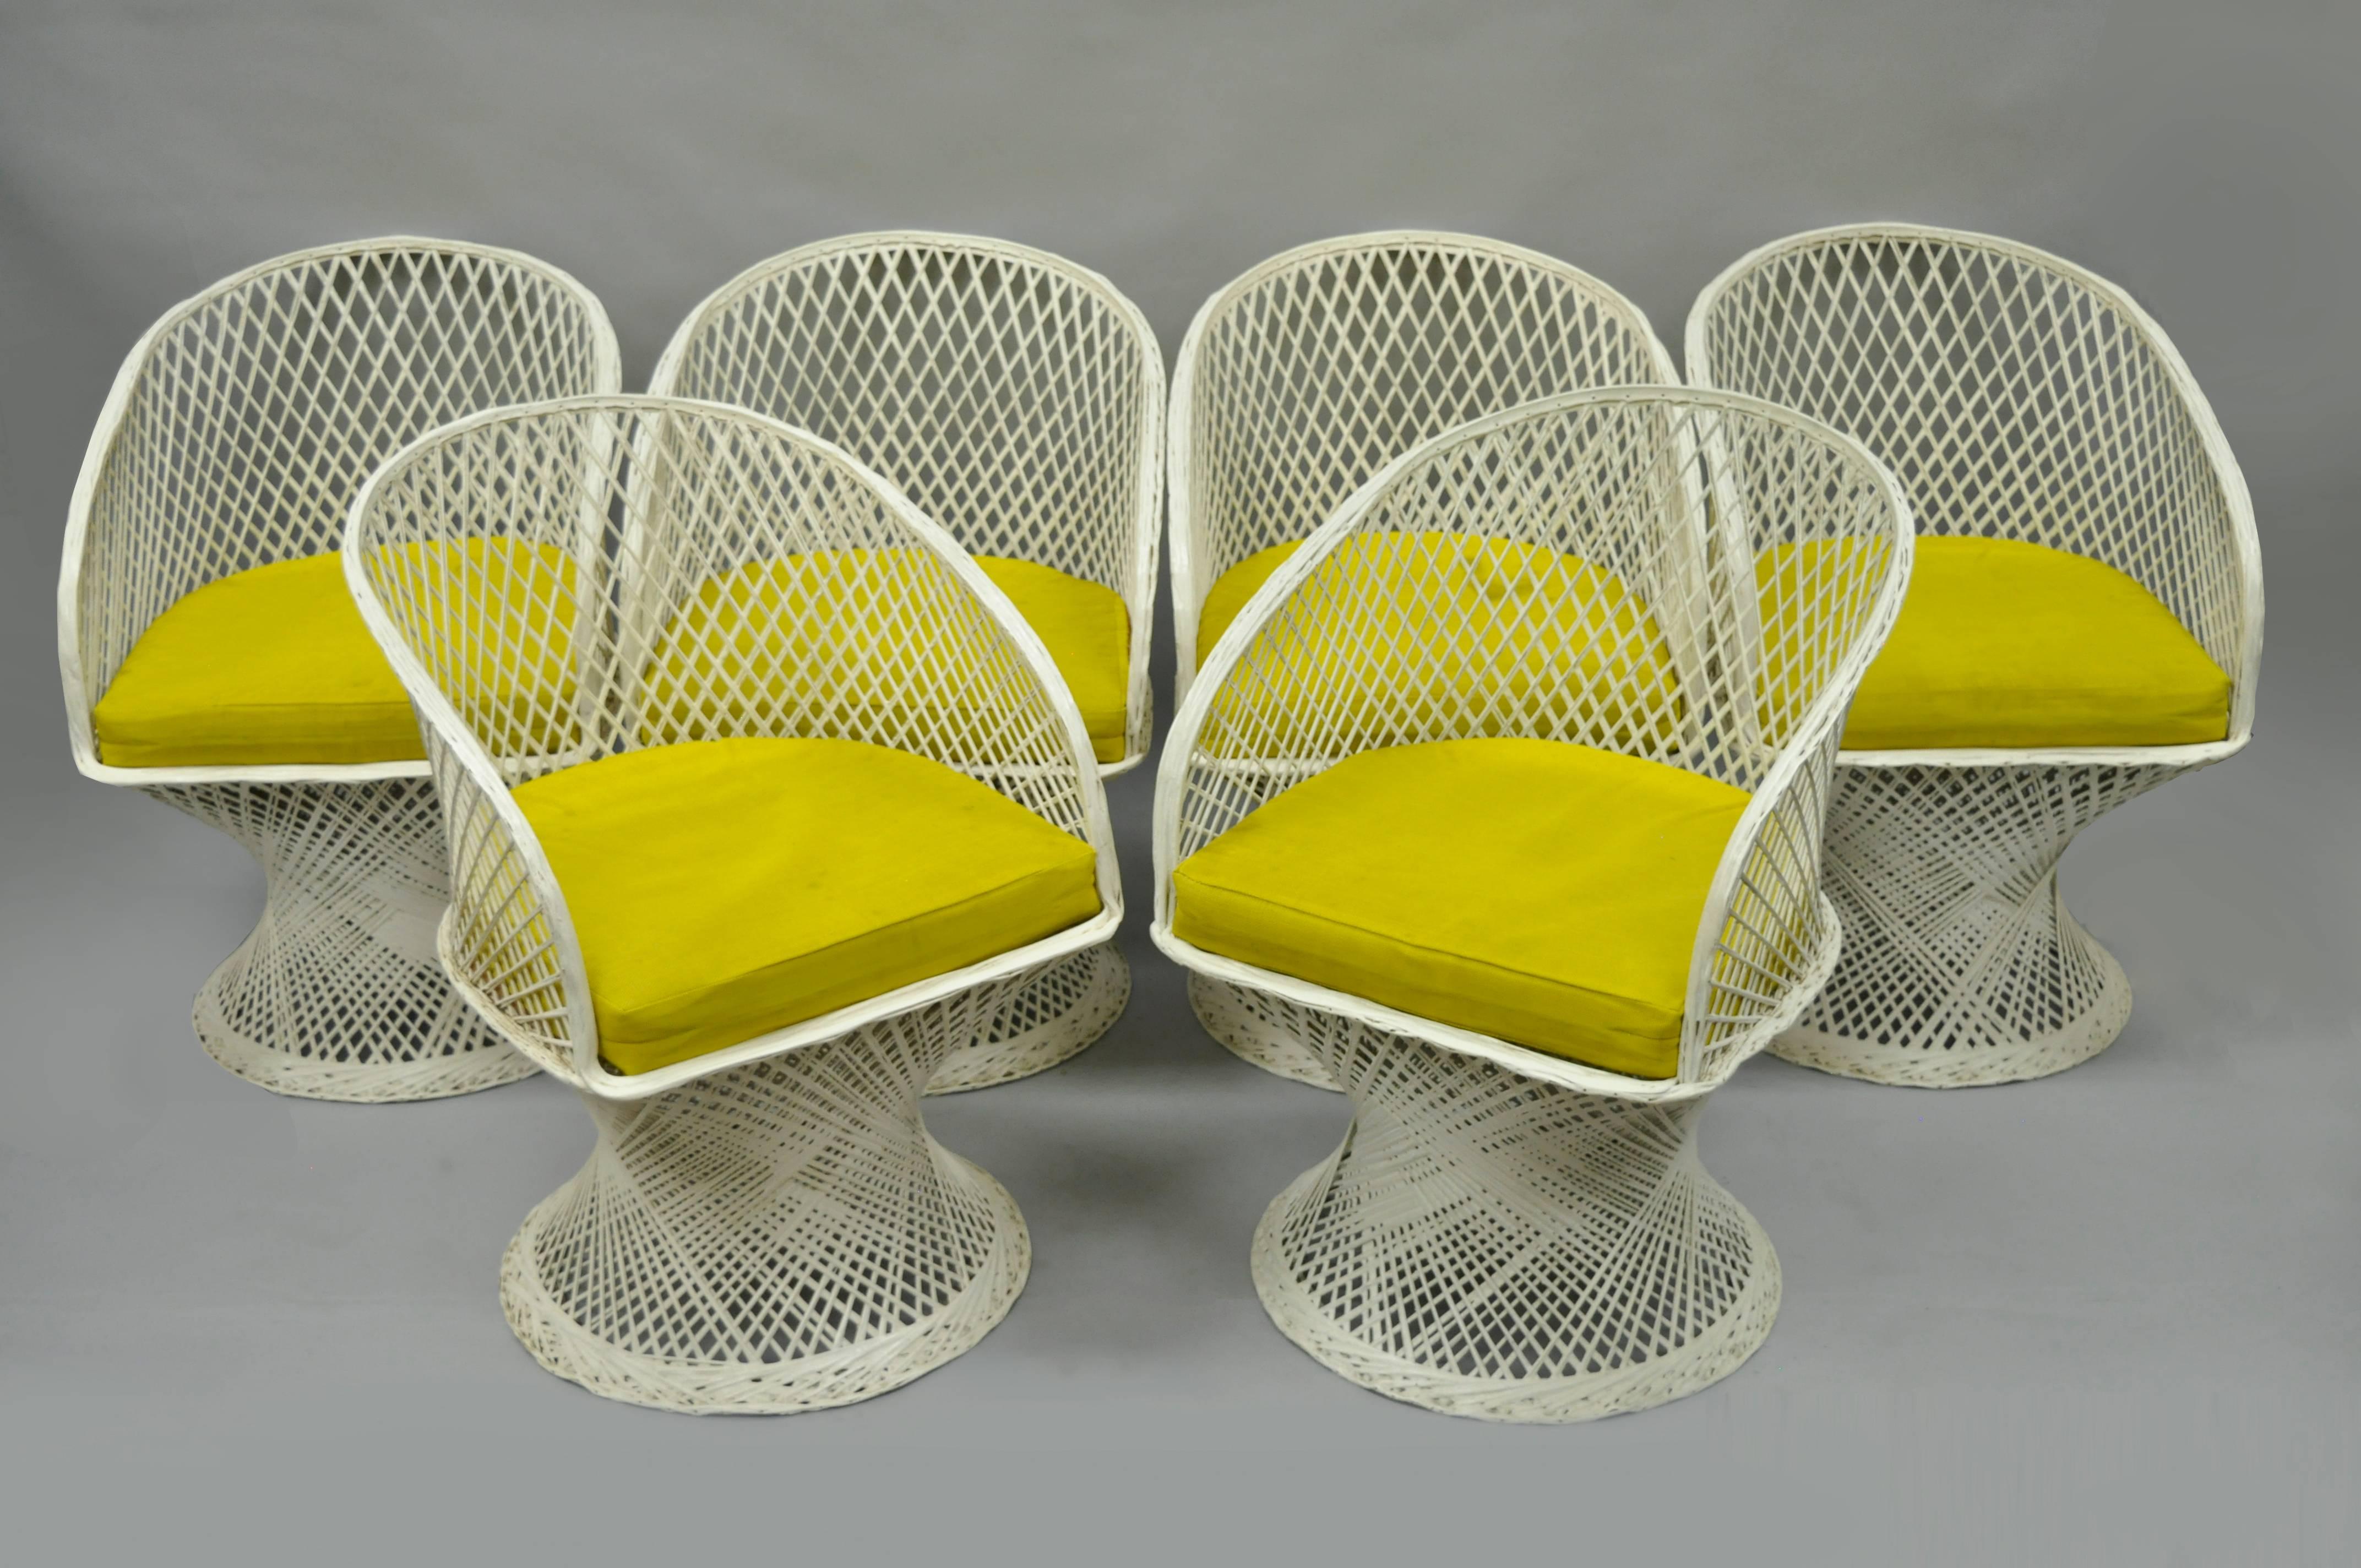 Rare vintage Mid-Century Modern Russell Woodard spun fiberglass seven piece dining set. This particular model is very rare due to the much higher quality construction and attractive form. The amount of fiberglass woven into the frame is noticeably